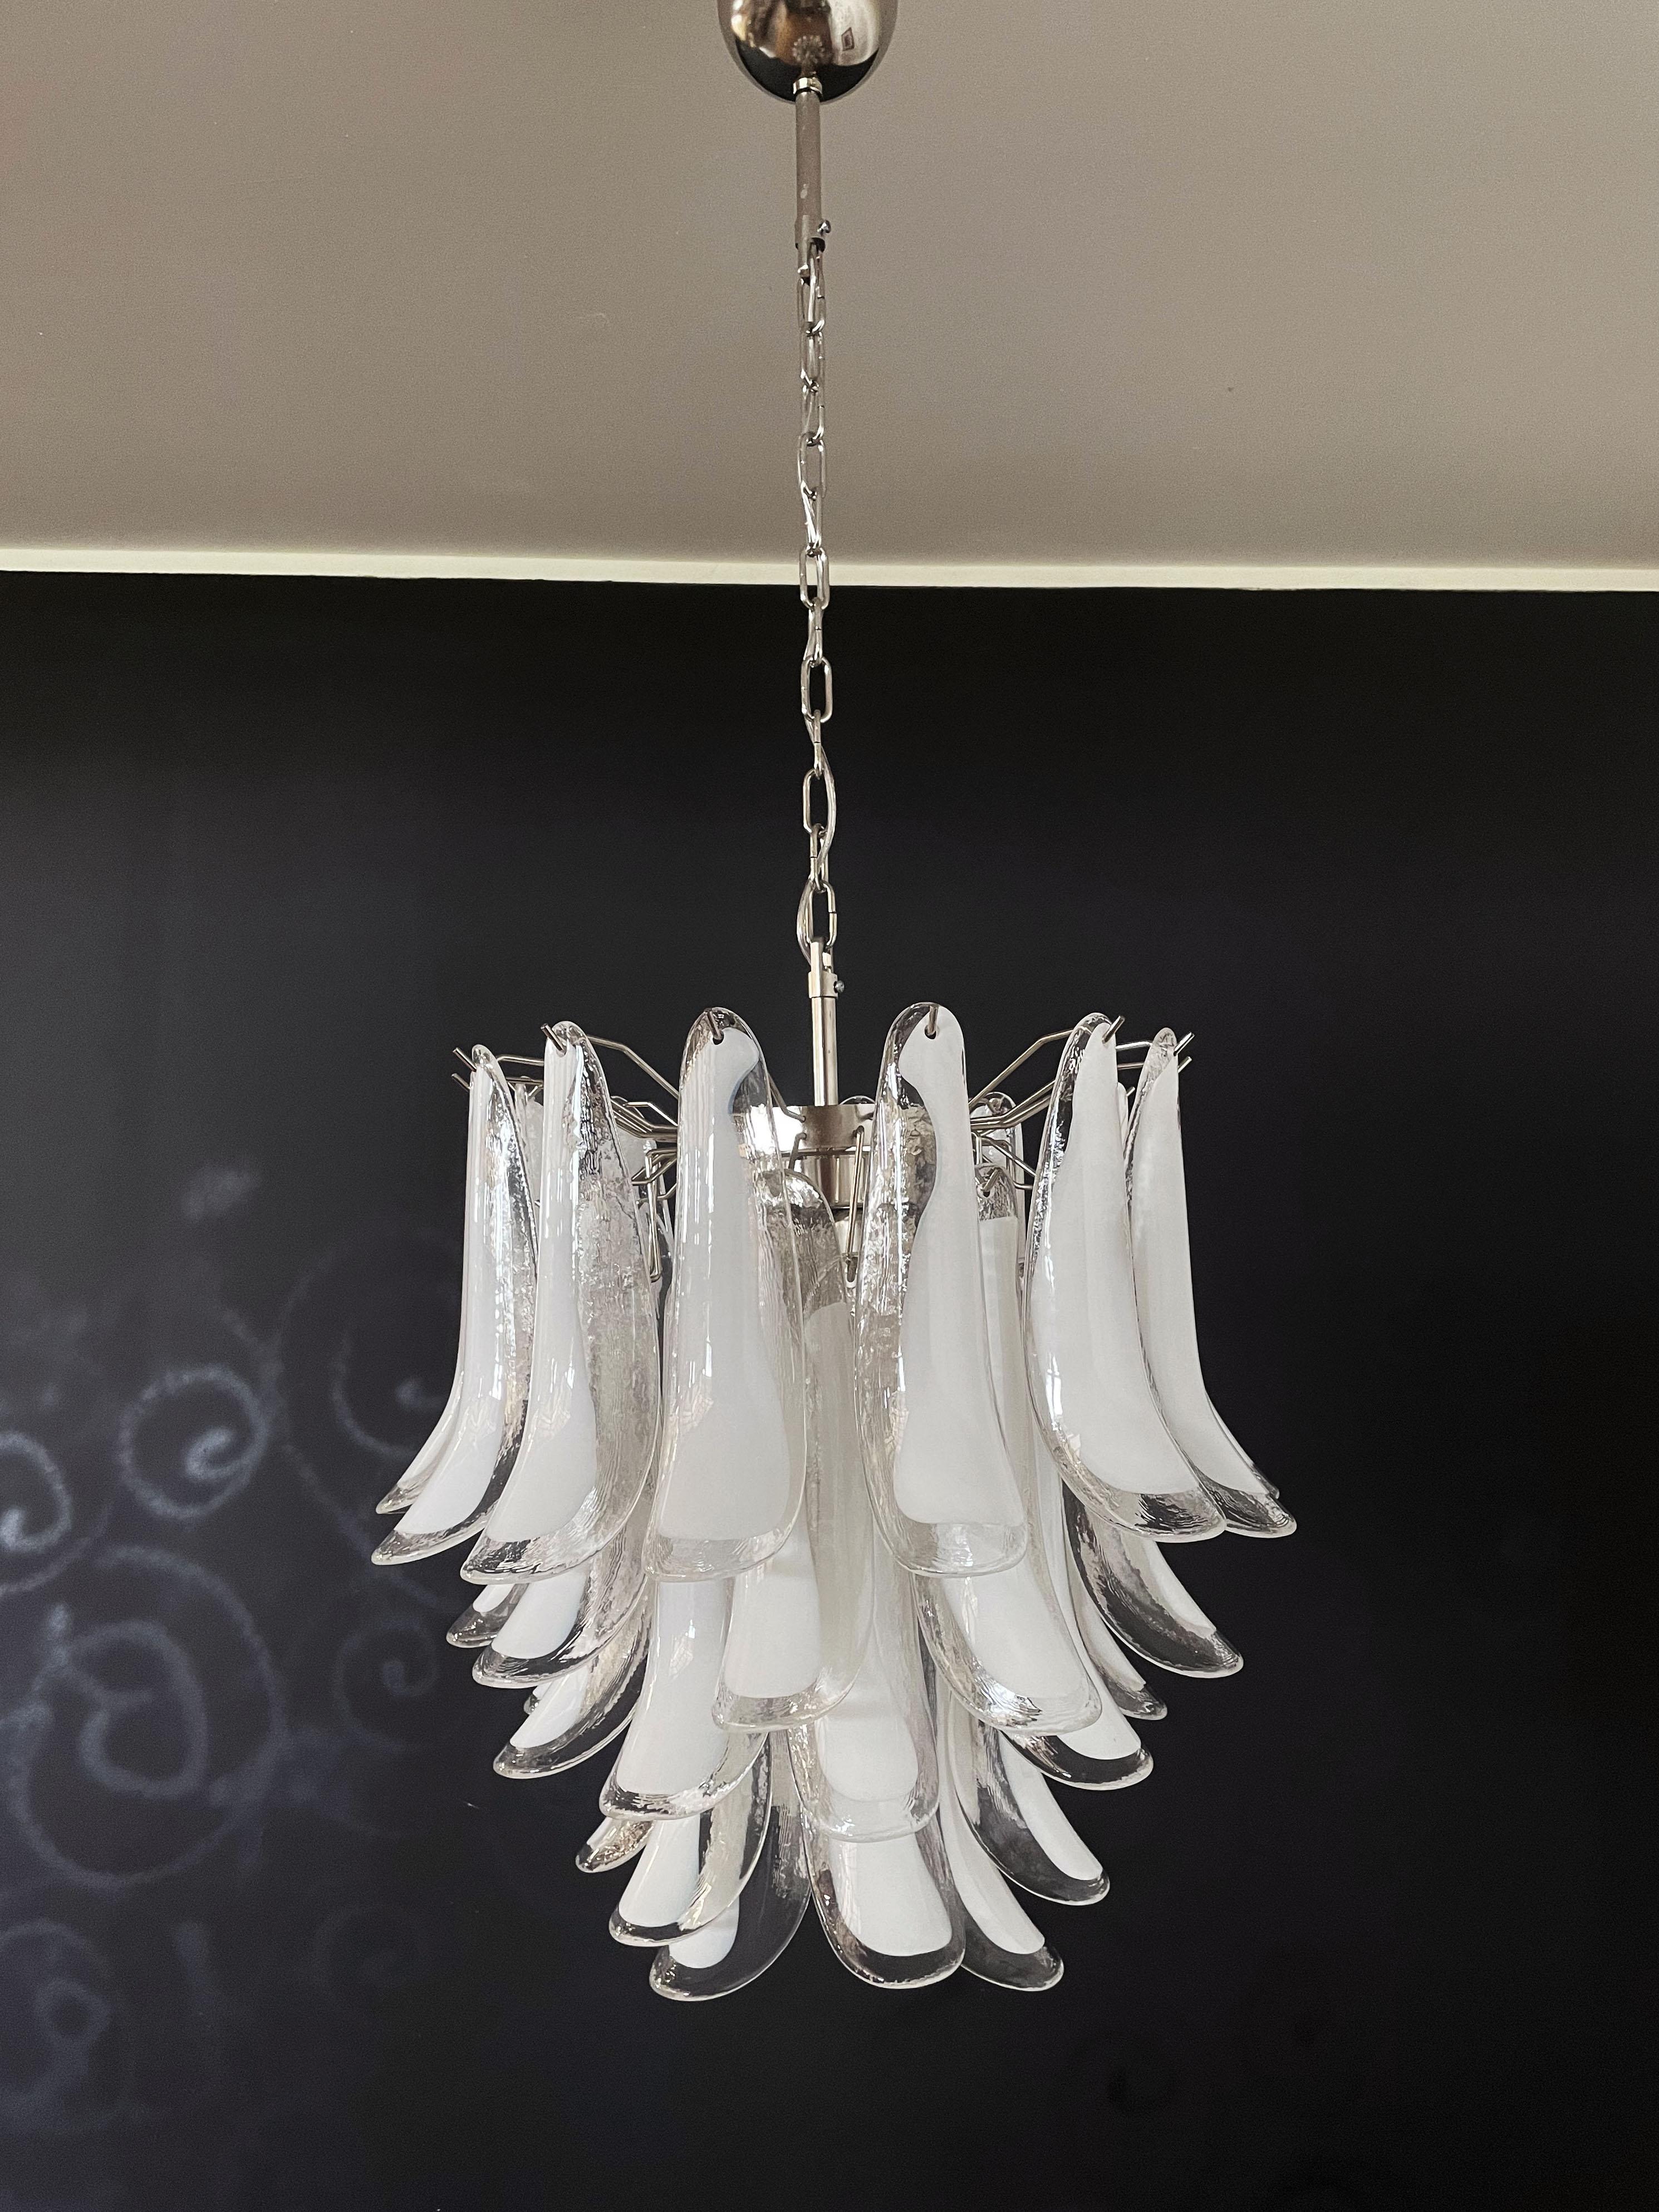 Galvanized Italian vintage Murano chandelier in the manner of Mazzega - 41 glass petals For Sale